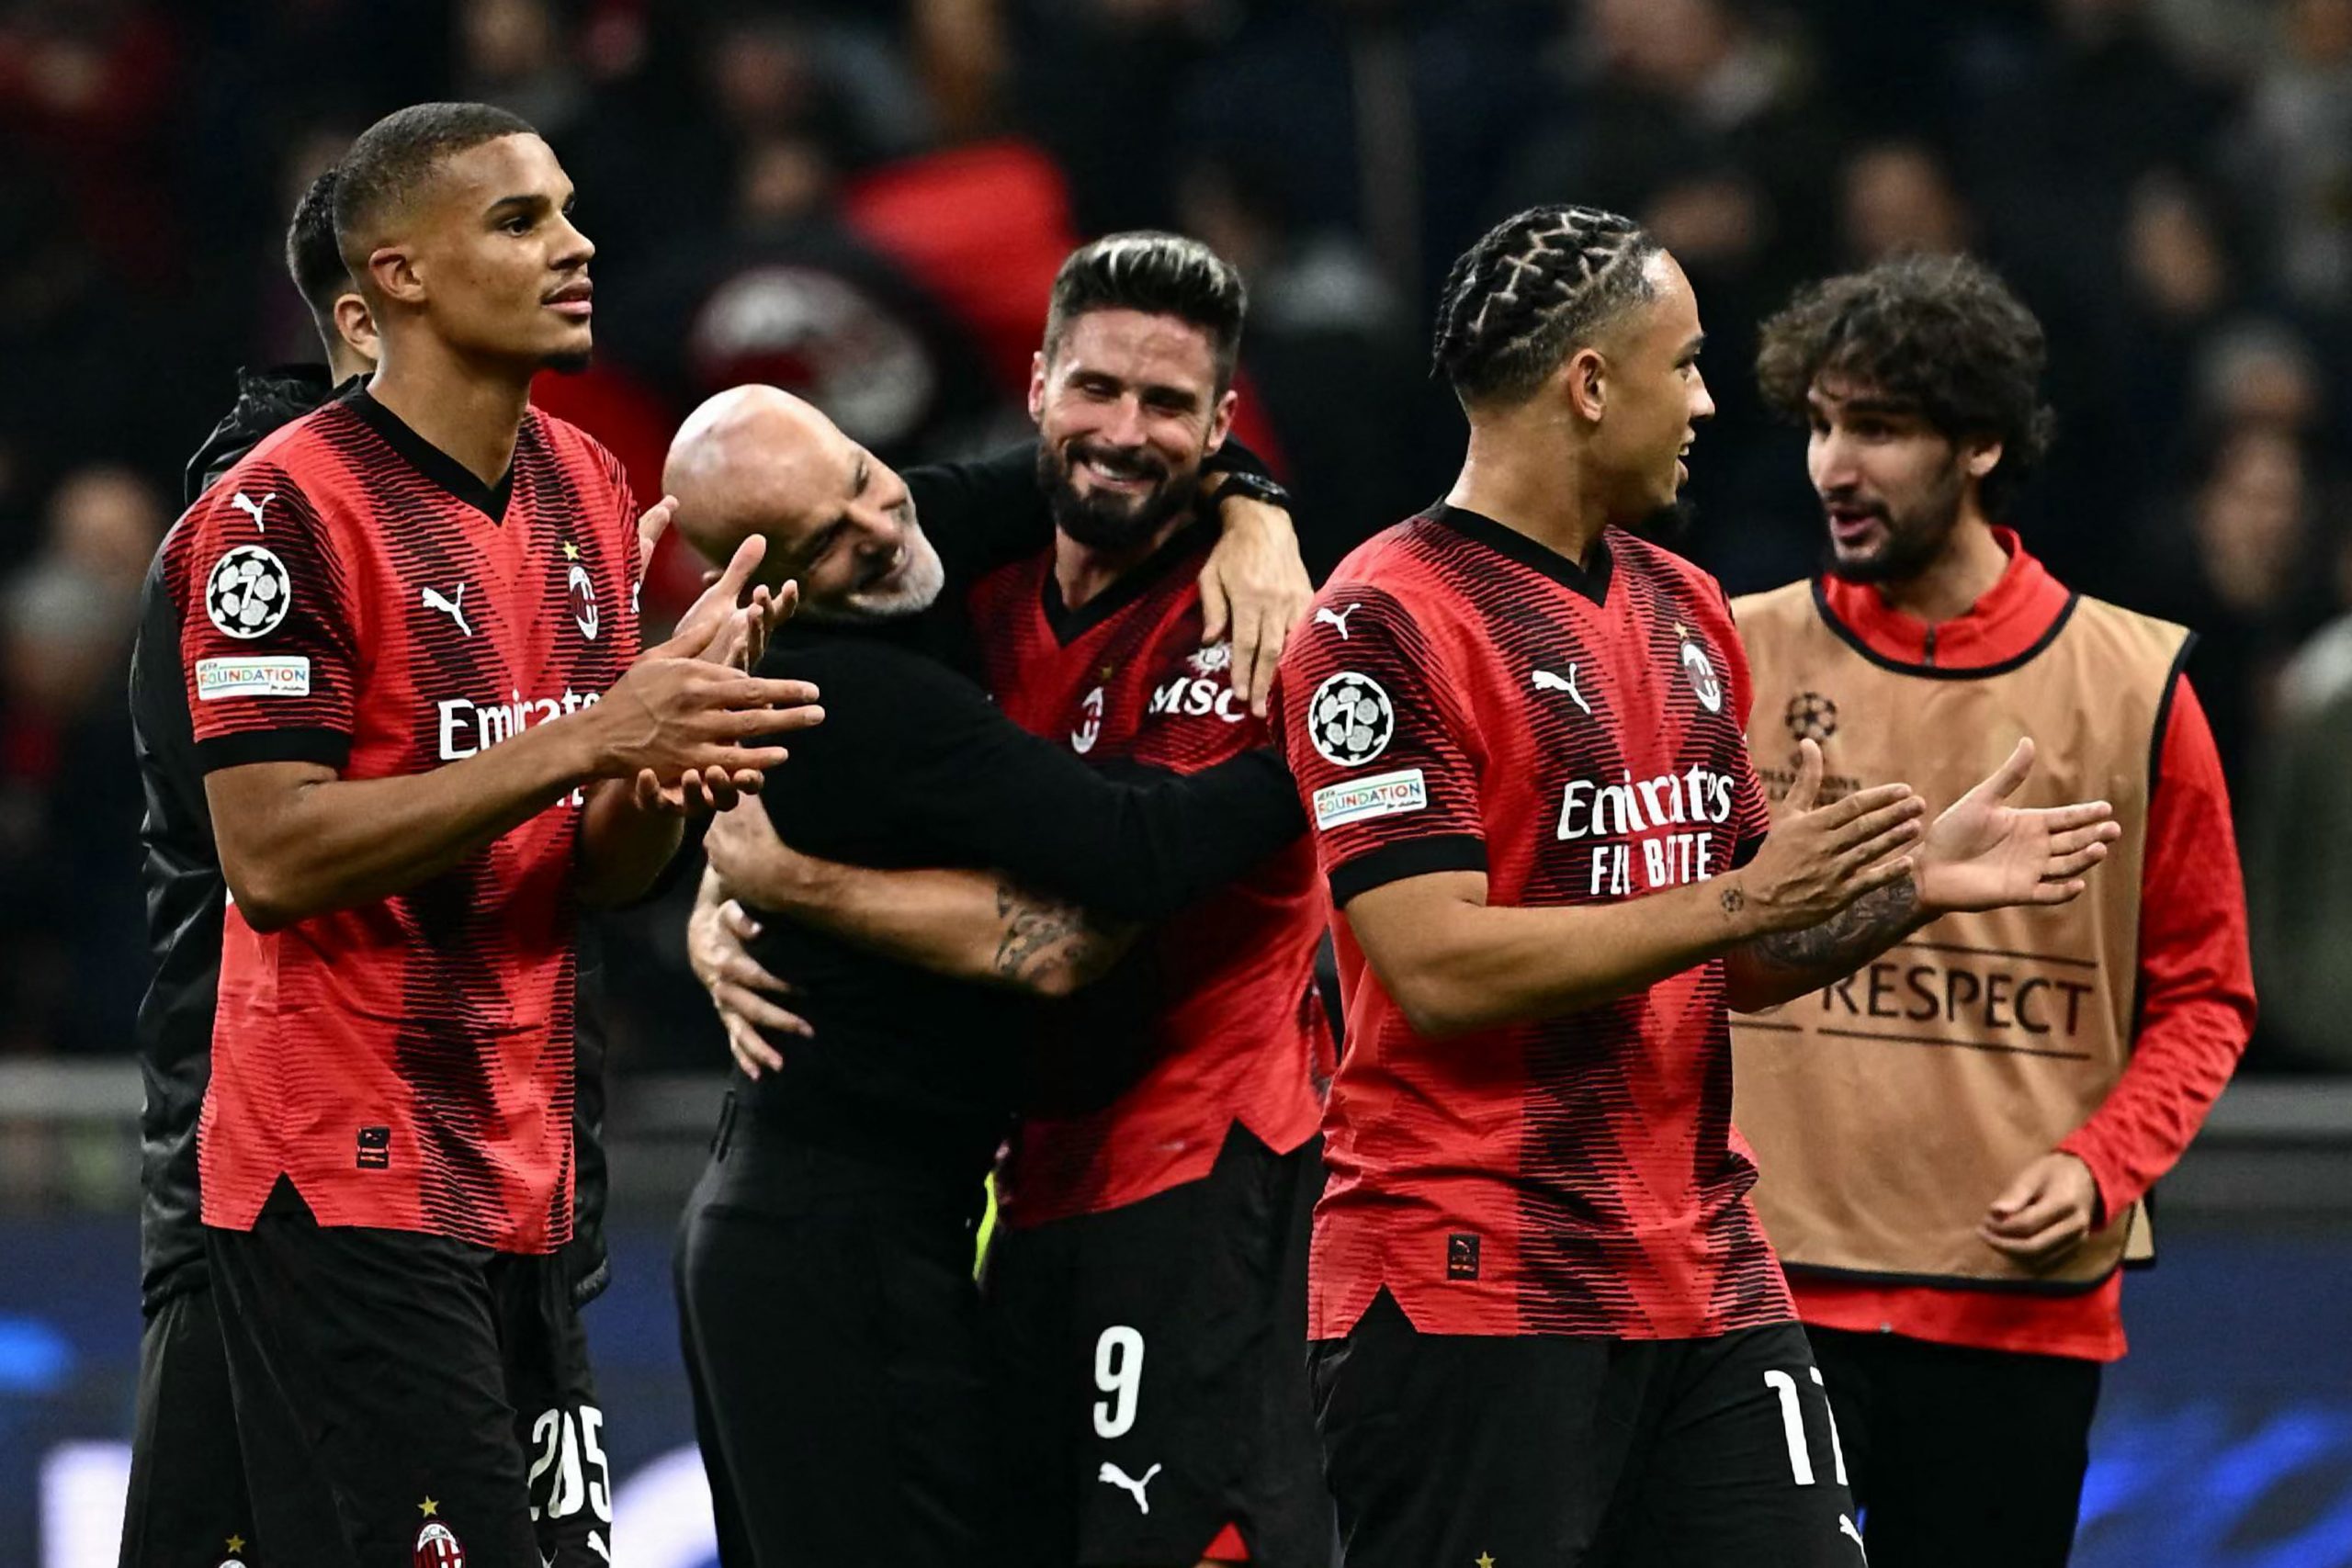 Milan bags crucial CL win over PSG